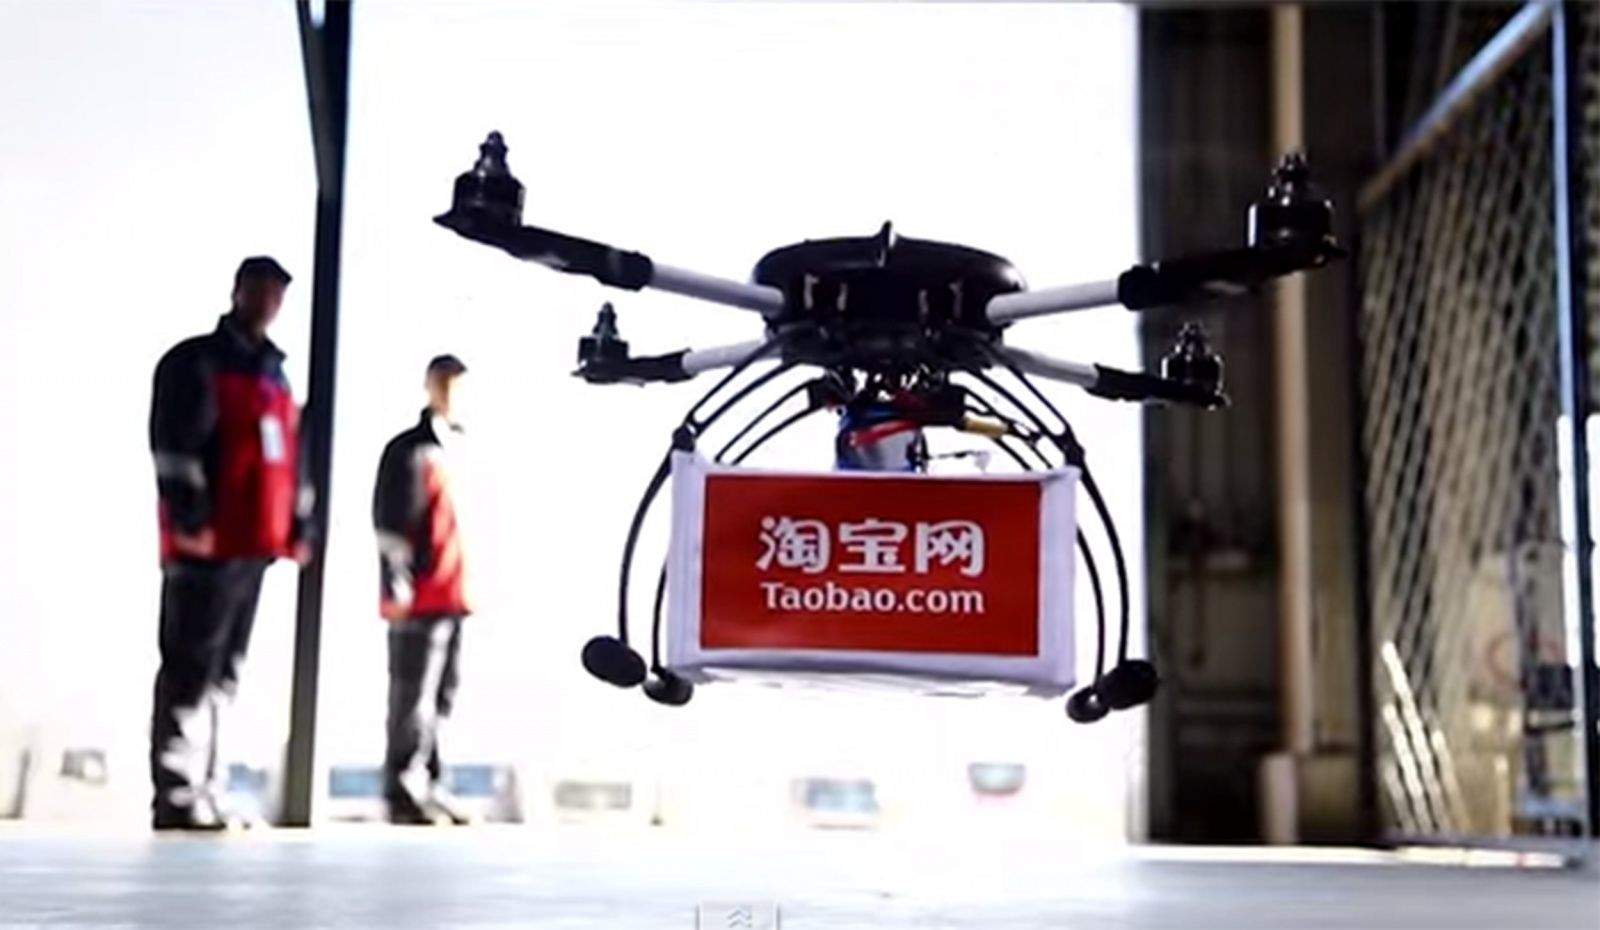 The Alibaba Group began testing drone delivery through its e-commerce site Taobao, bring tea to 450 doorsteps within an hour. Photo: Taobao.com